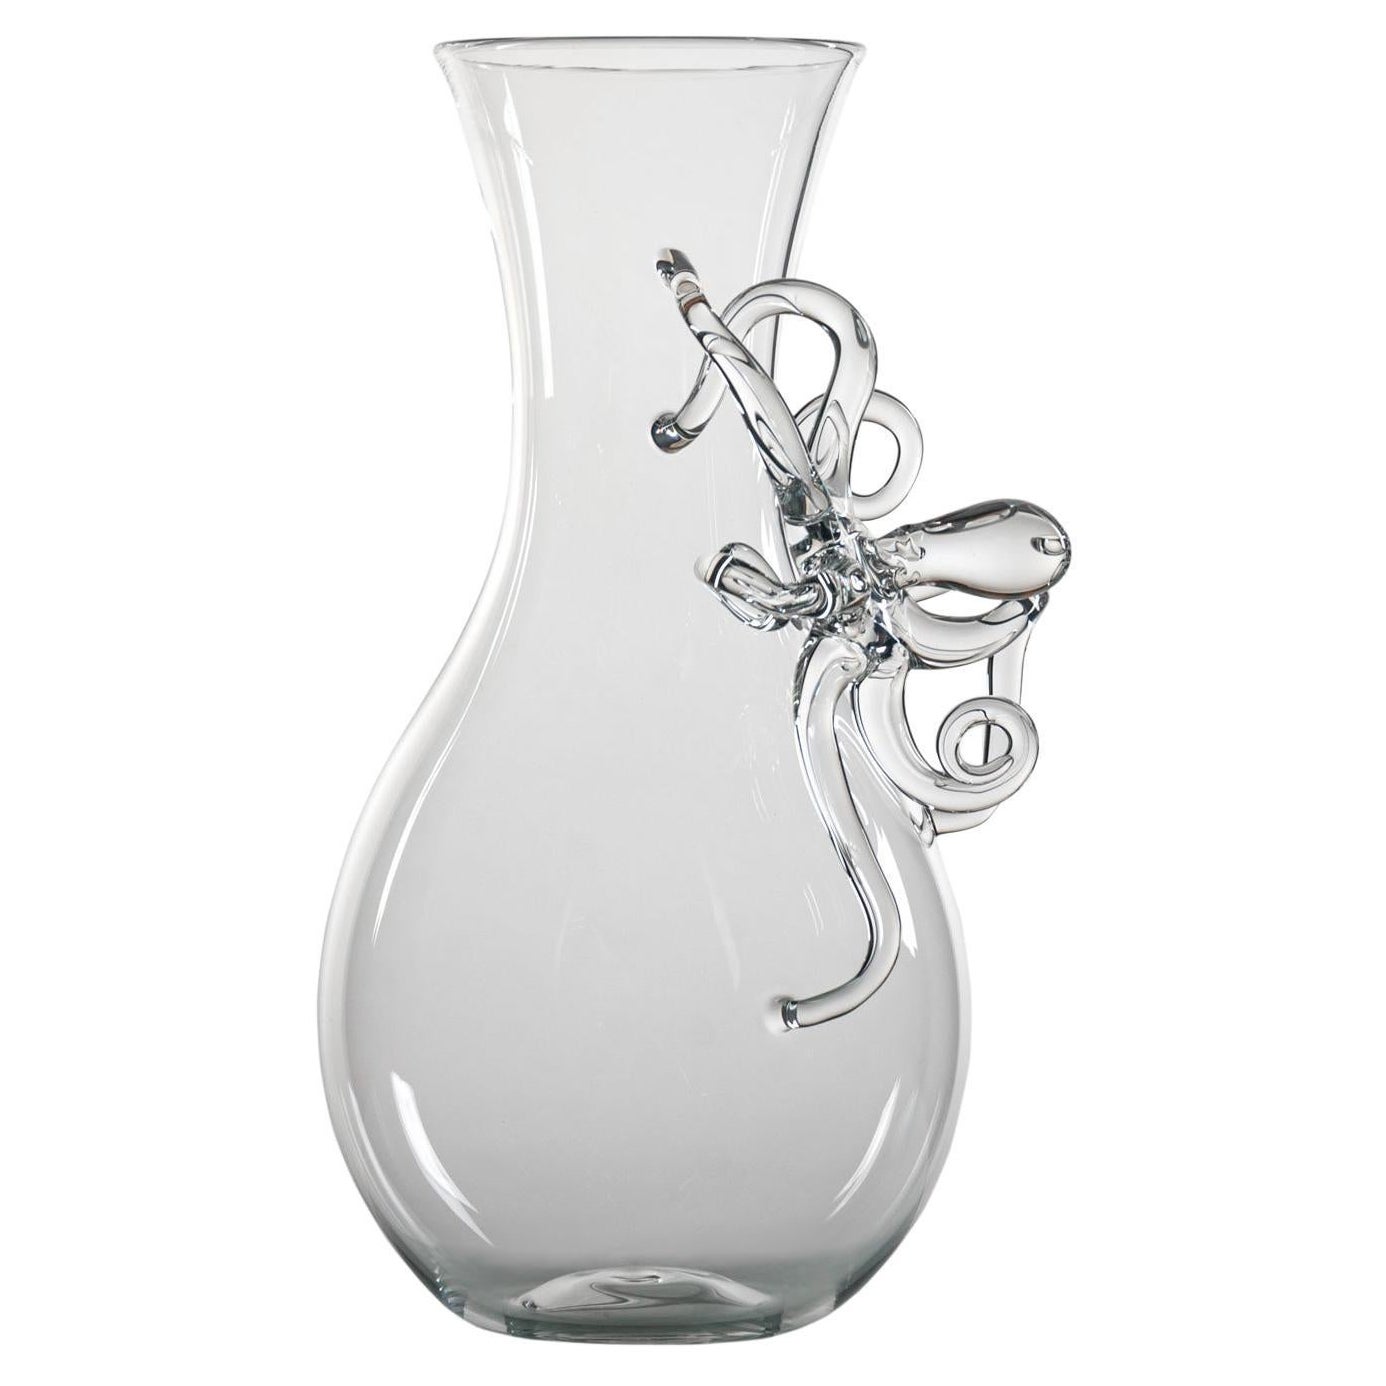 "Piovra Pitcher" Hand Blown Glass Pitcher by Simone Crestani For Sale